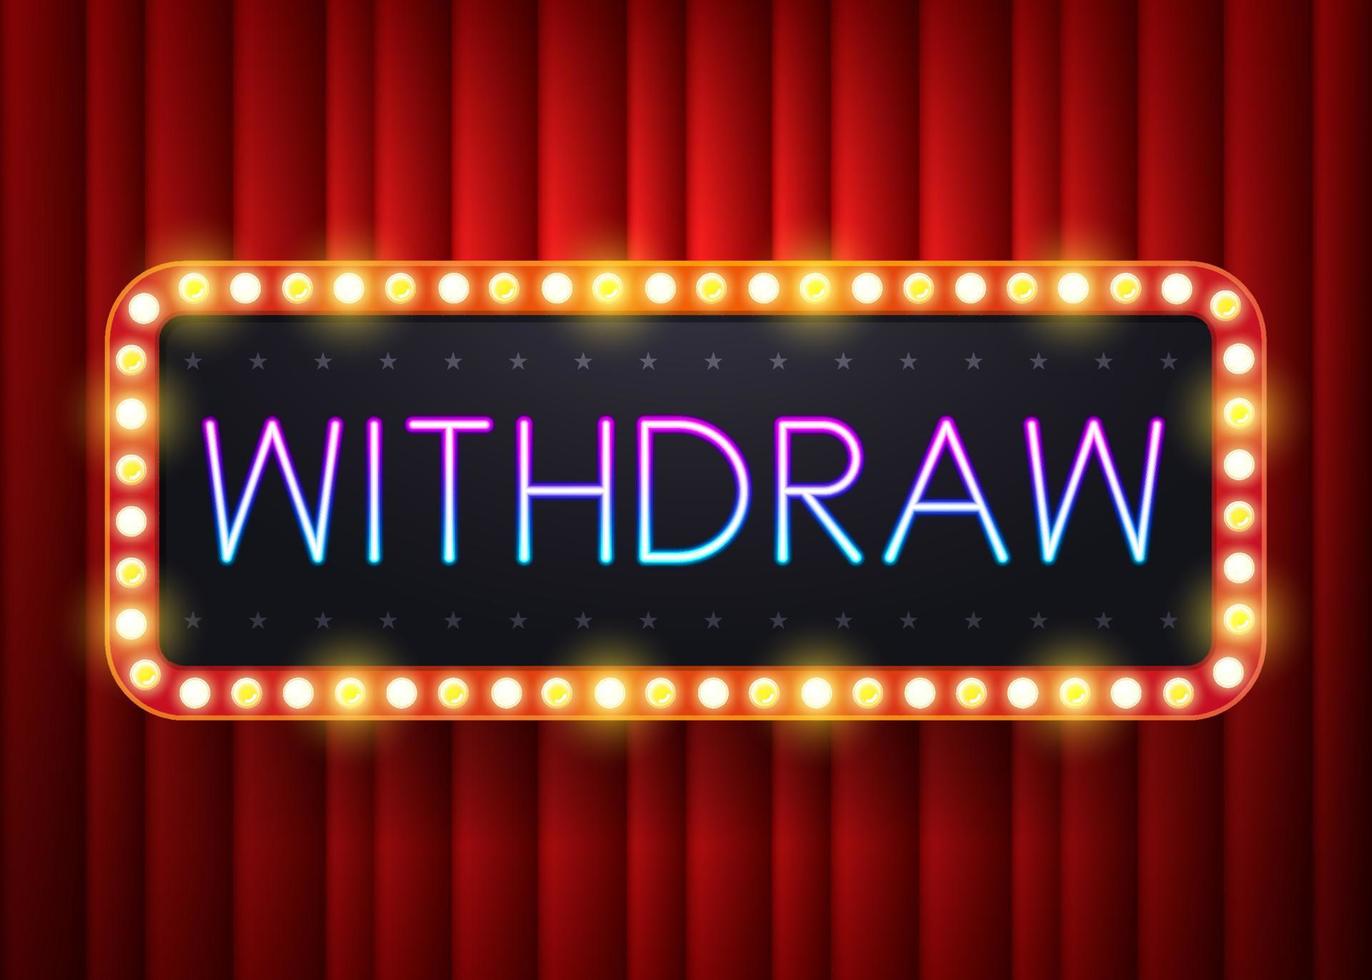 Withdraw neon light frame. text with electric bulbs on red curtain background. Vector illustration